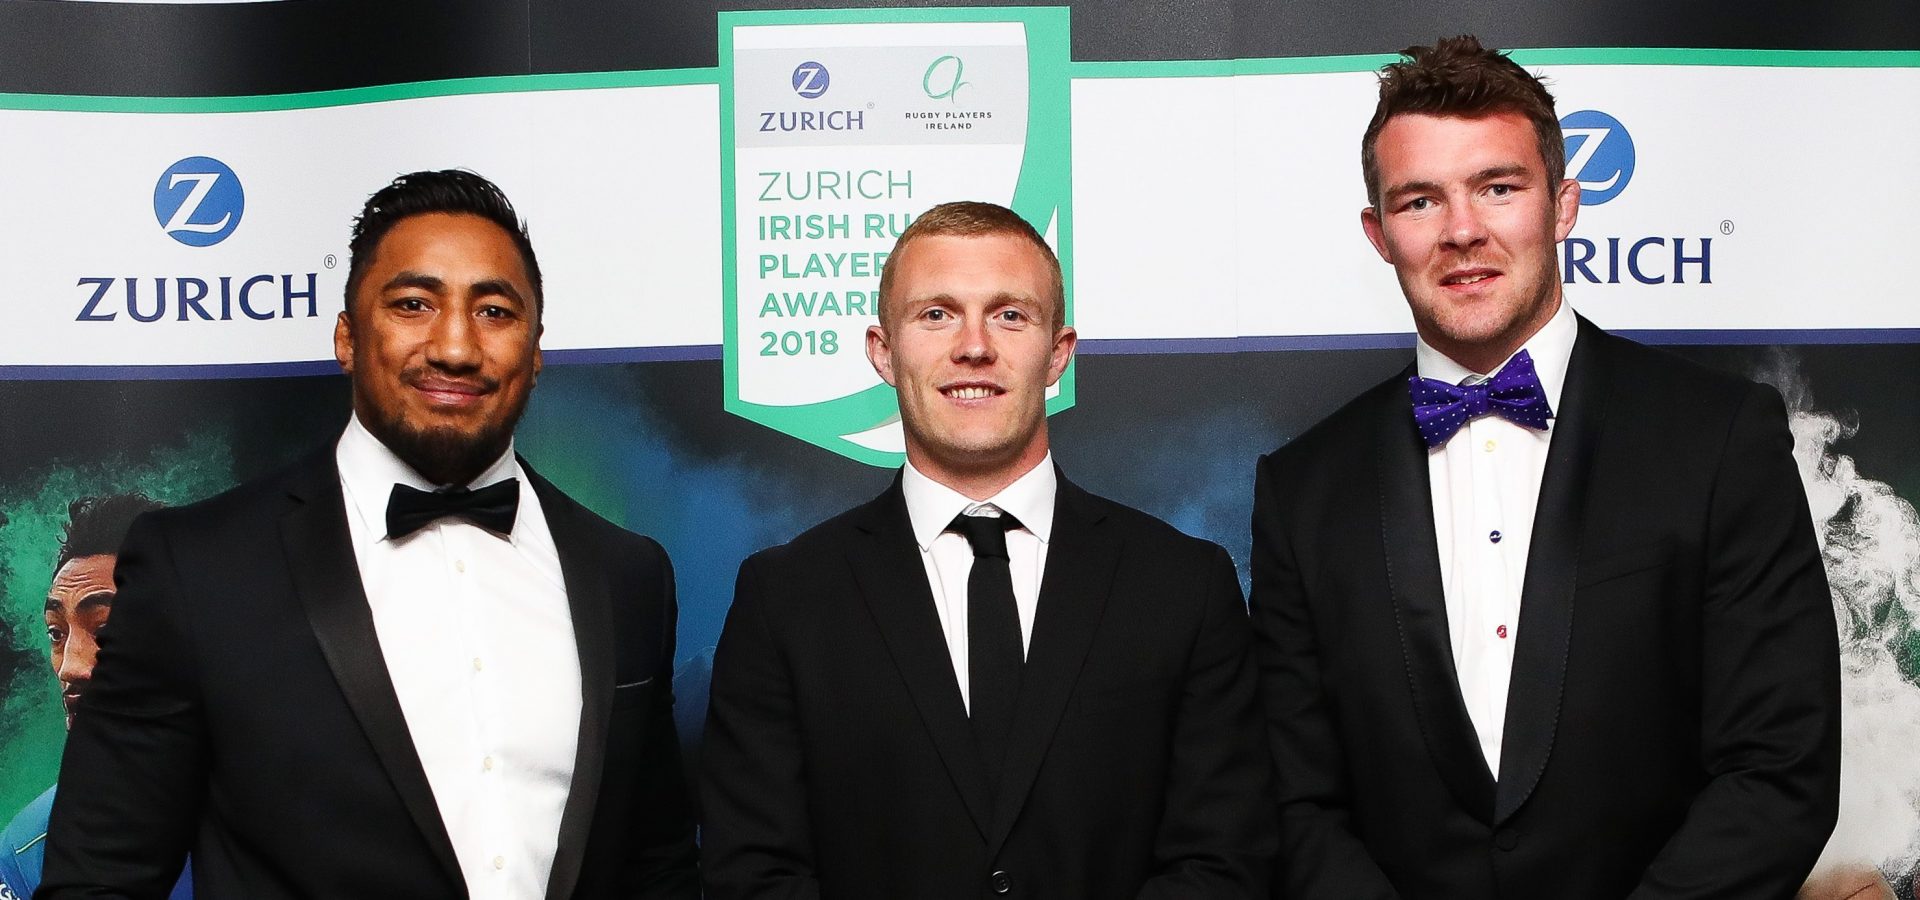 JOIN US AT THE ZURICH IRISH RUGBY PLAYERS AWARDS 2019!